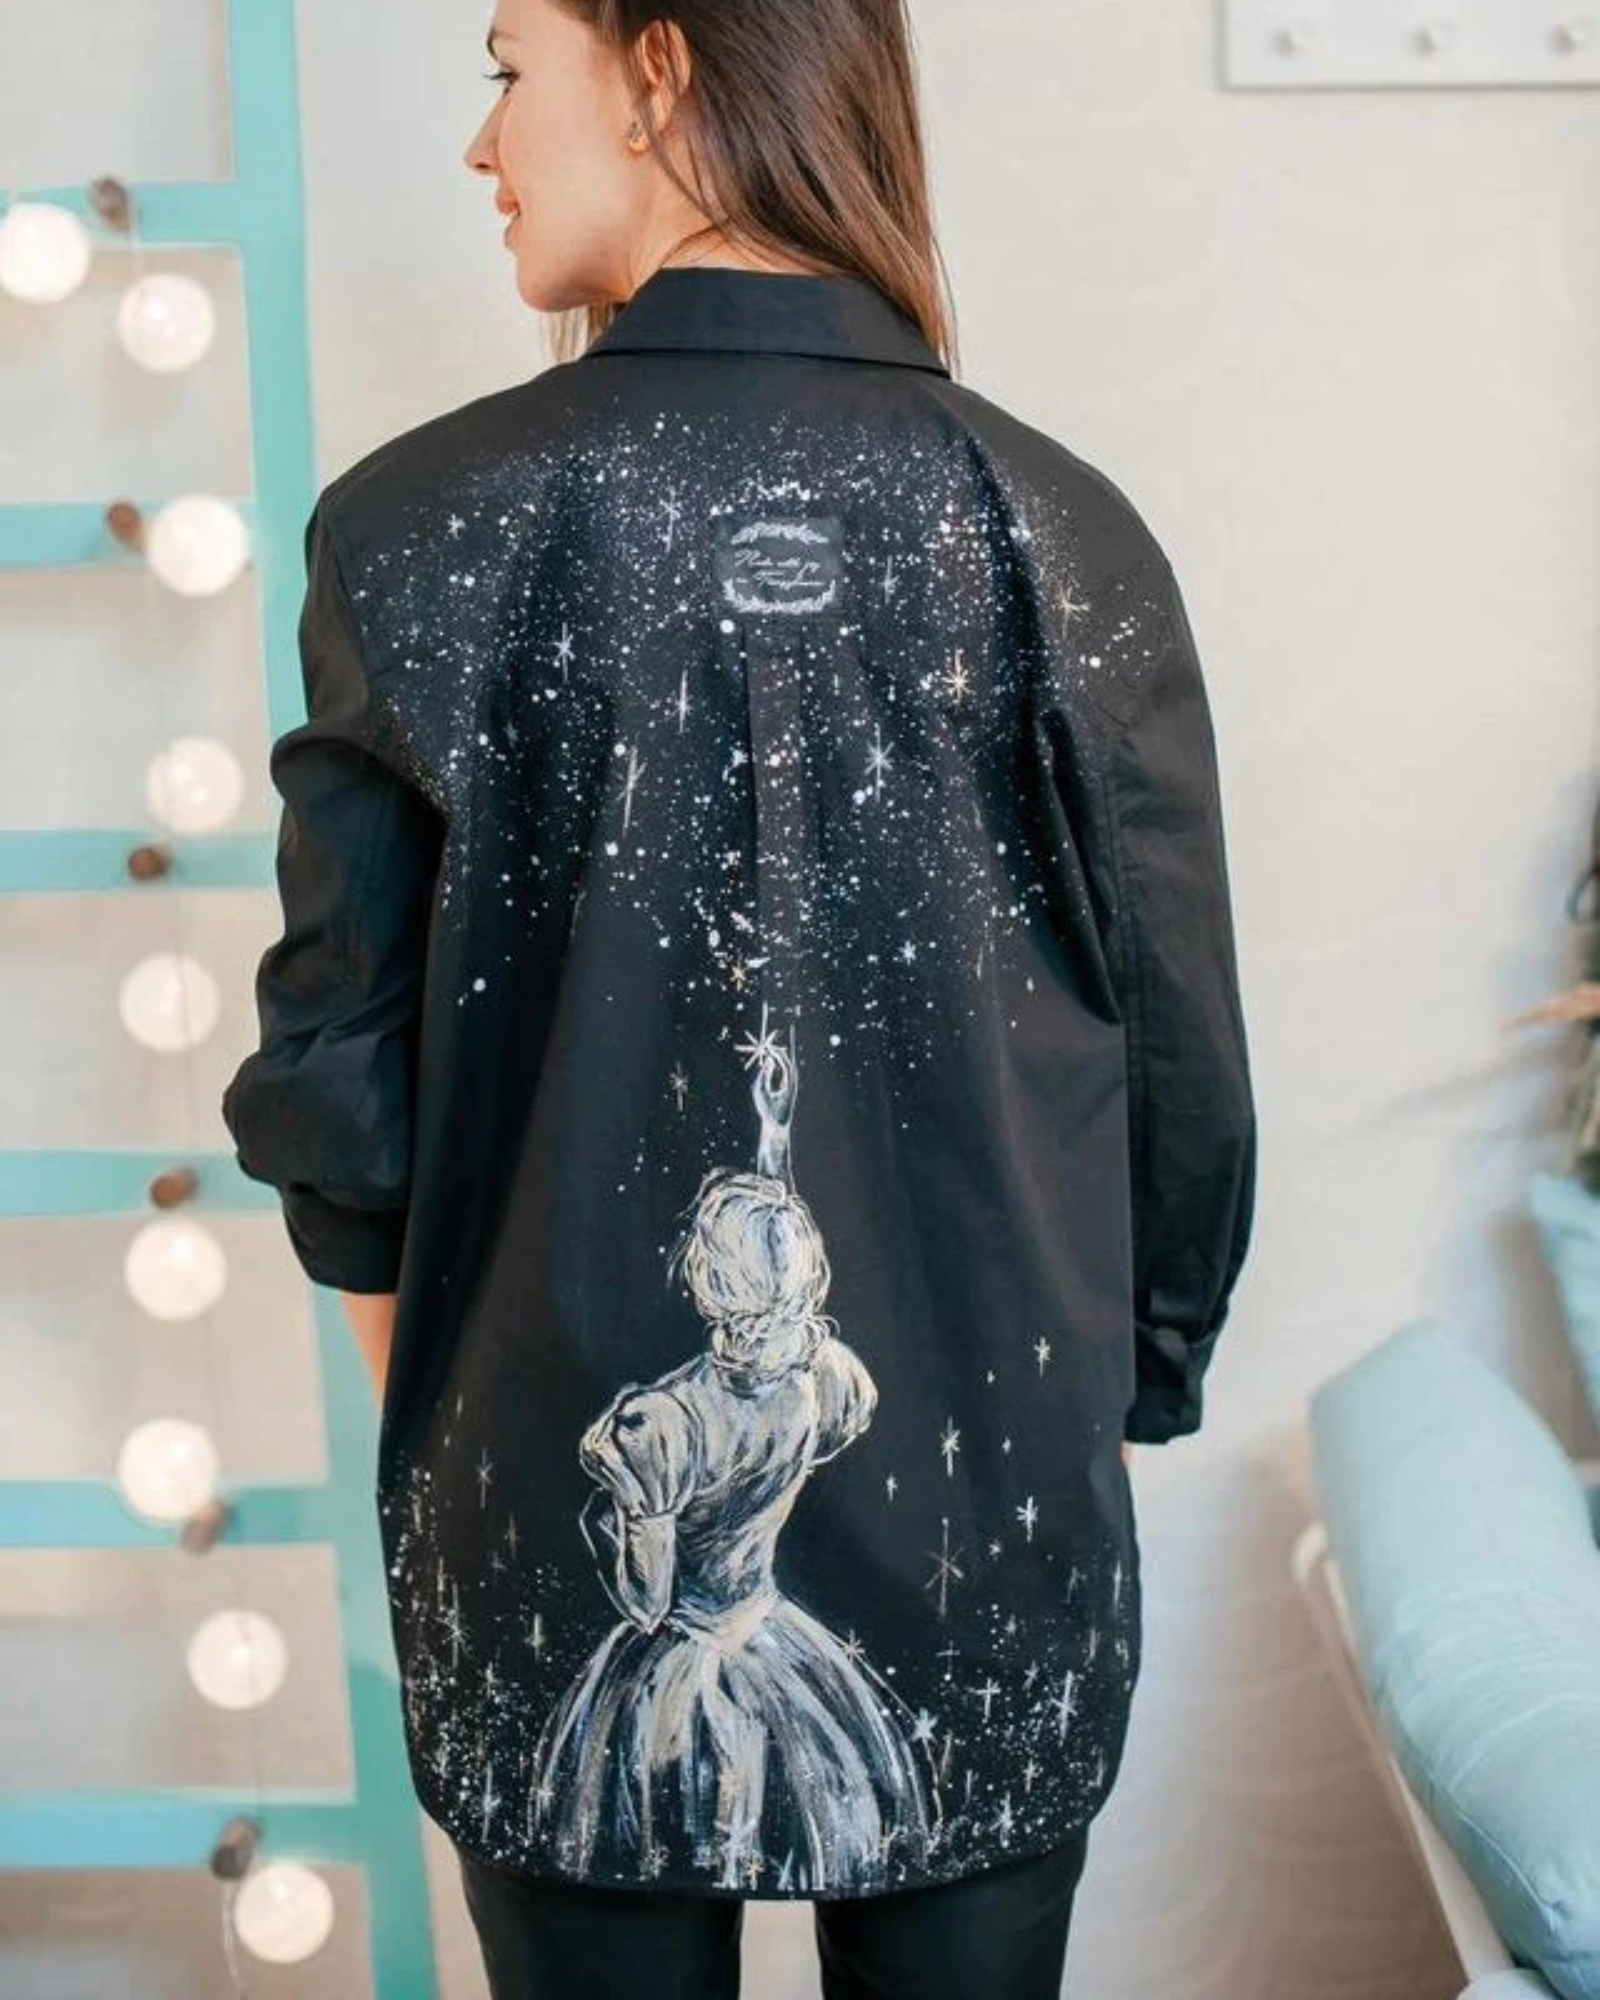 Hand painted shirt "Girl with the star"